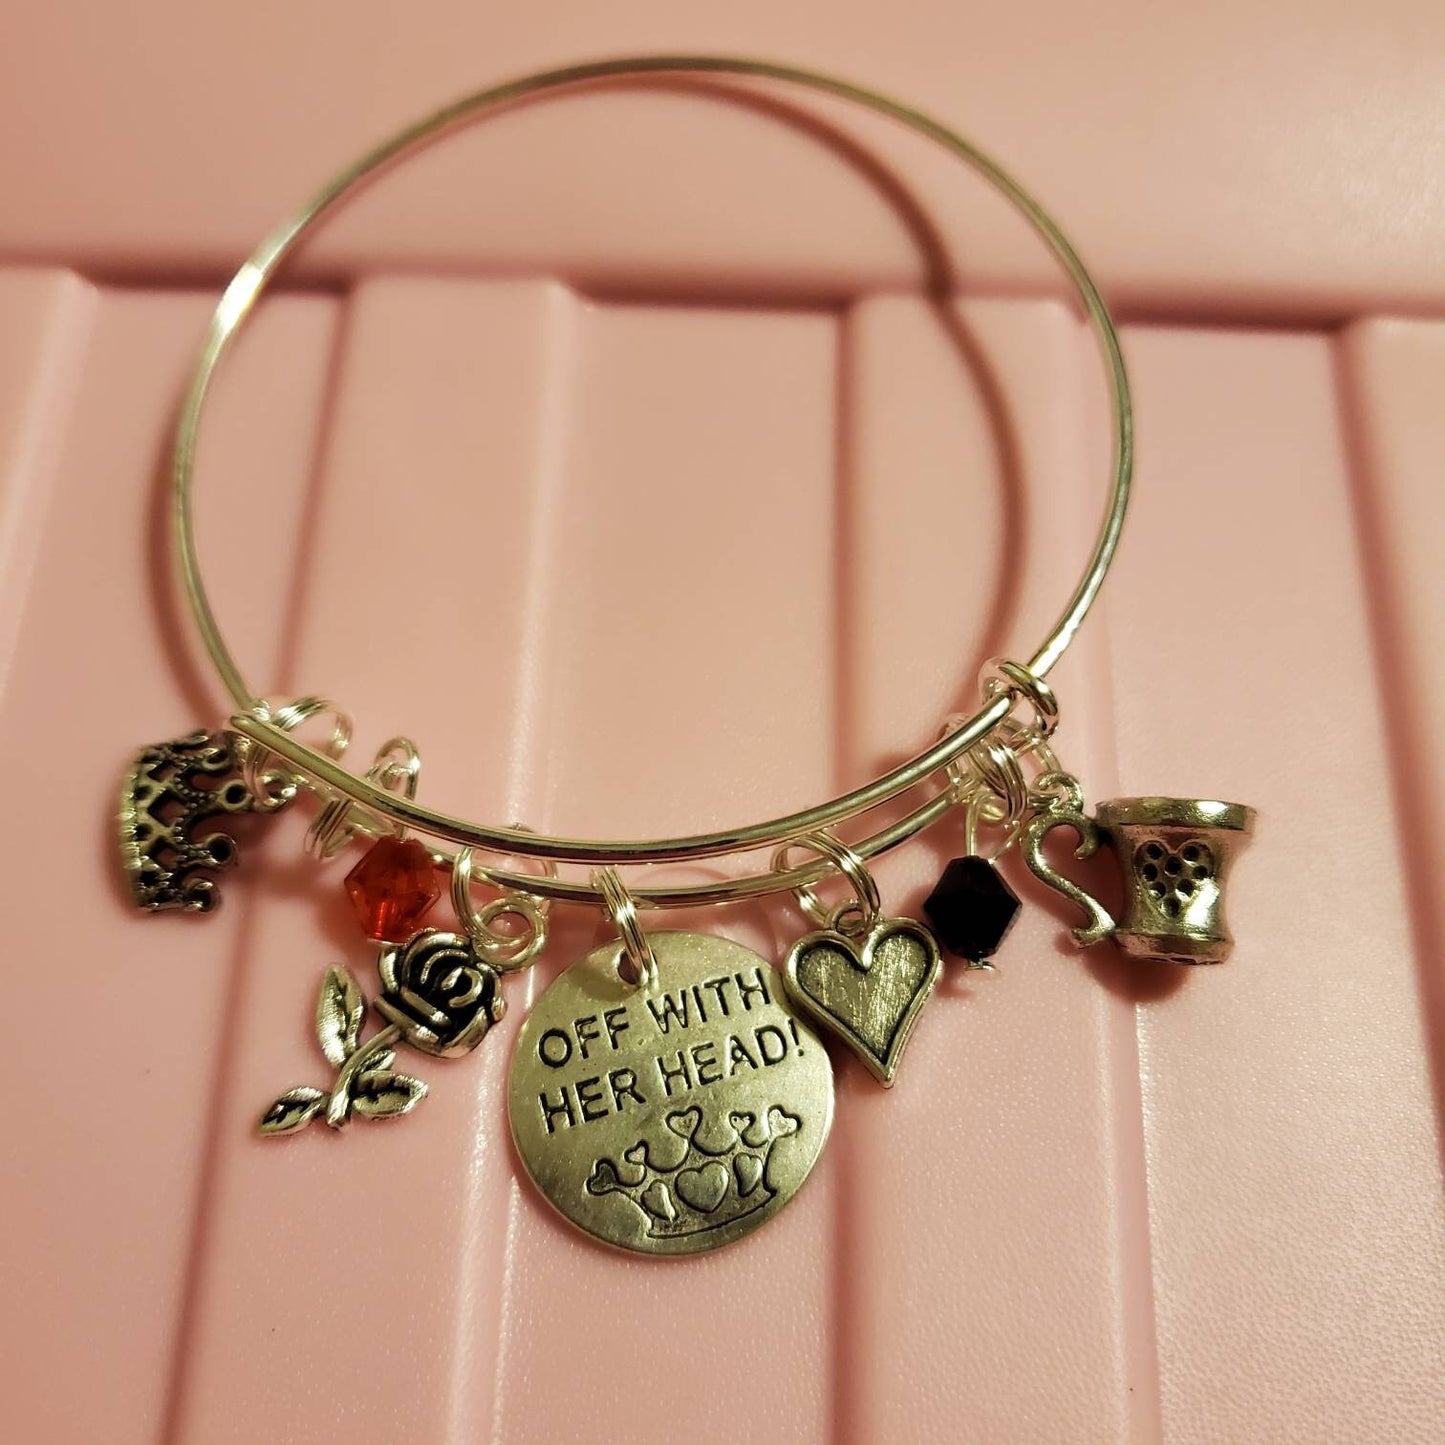 Off With Her Head Adjustable Bangle